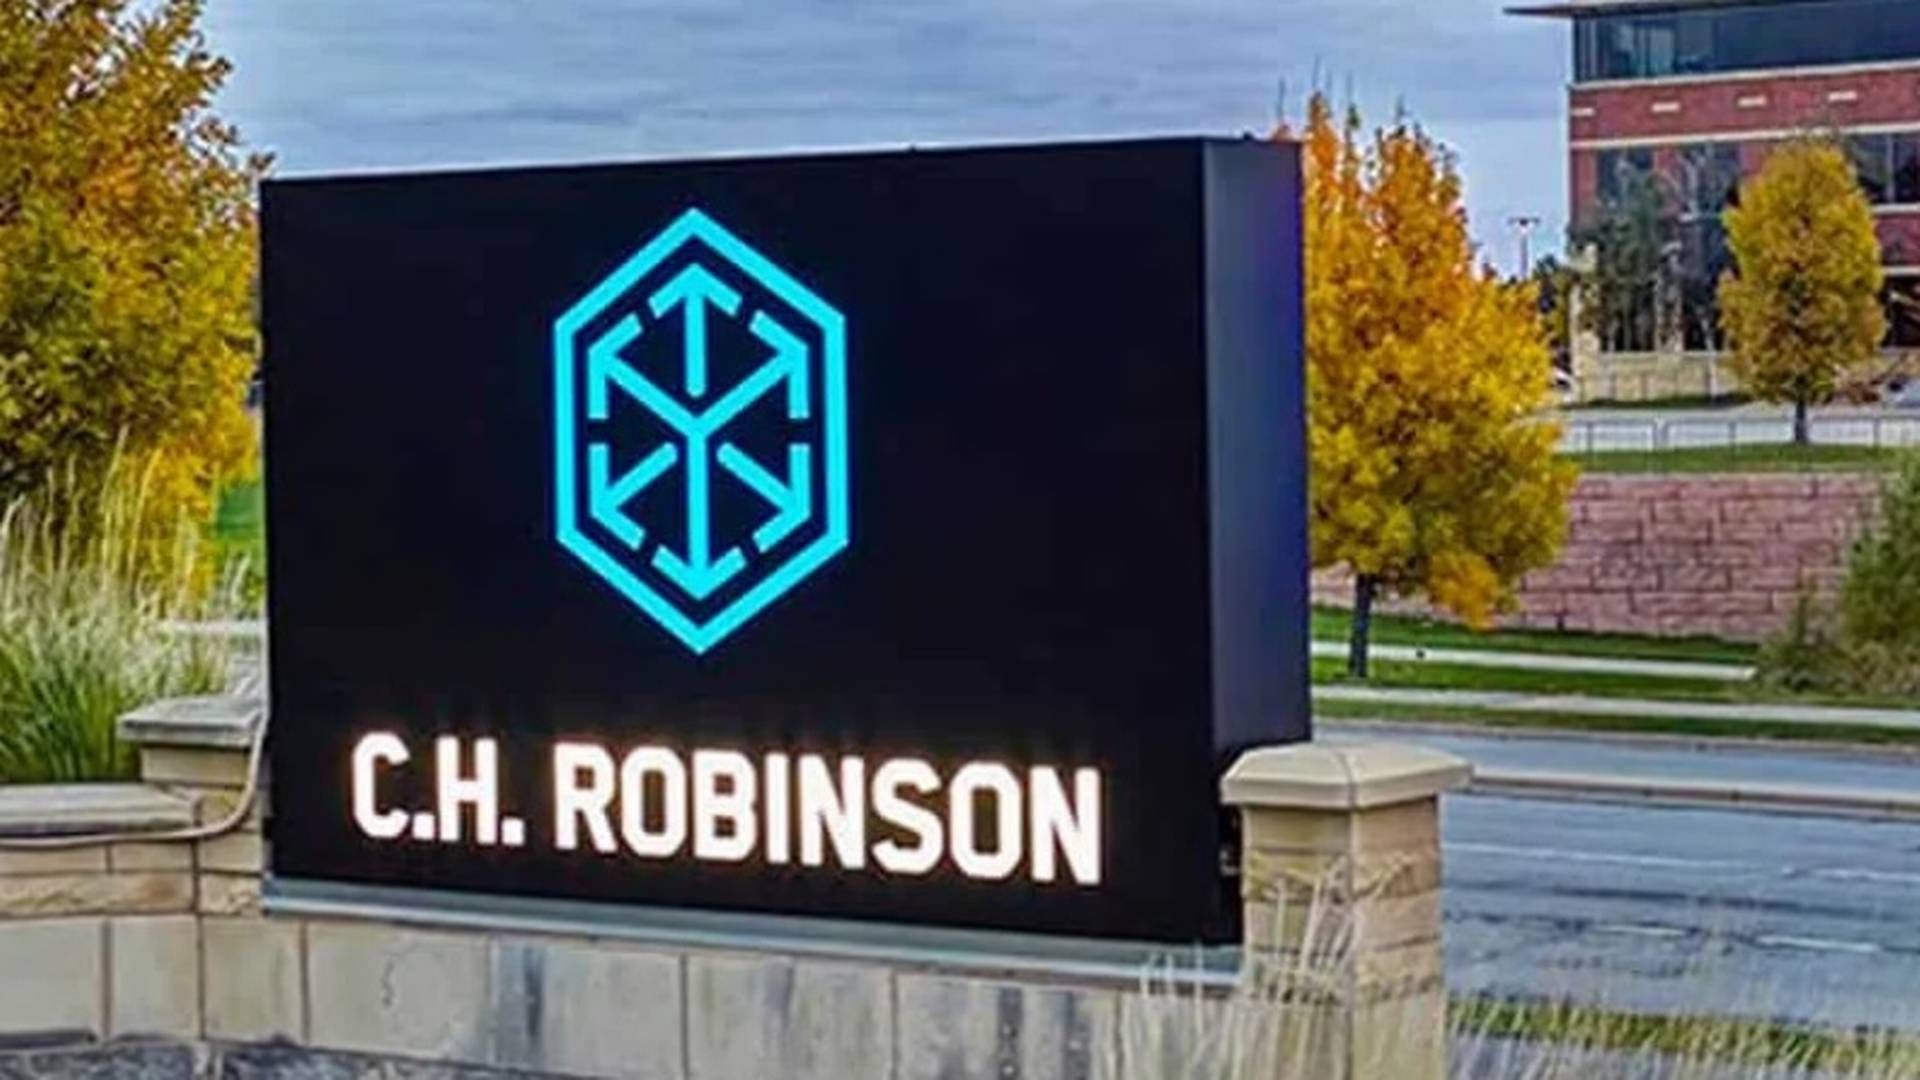 Dave Bozeman is to take over as chief executive officer of major US logistics firm C.H. Robinson. | Photo: C.h. Robinson / Pr